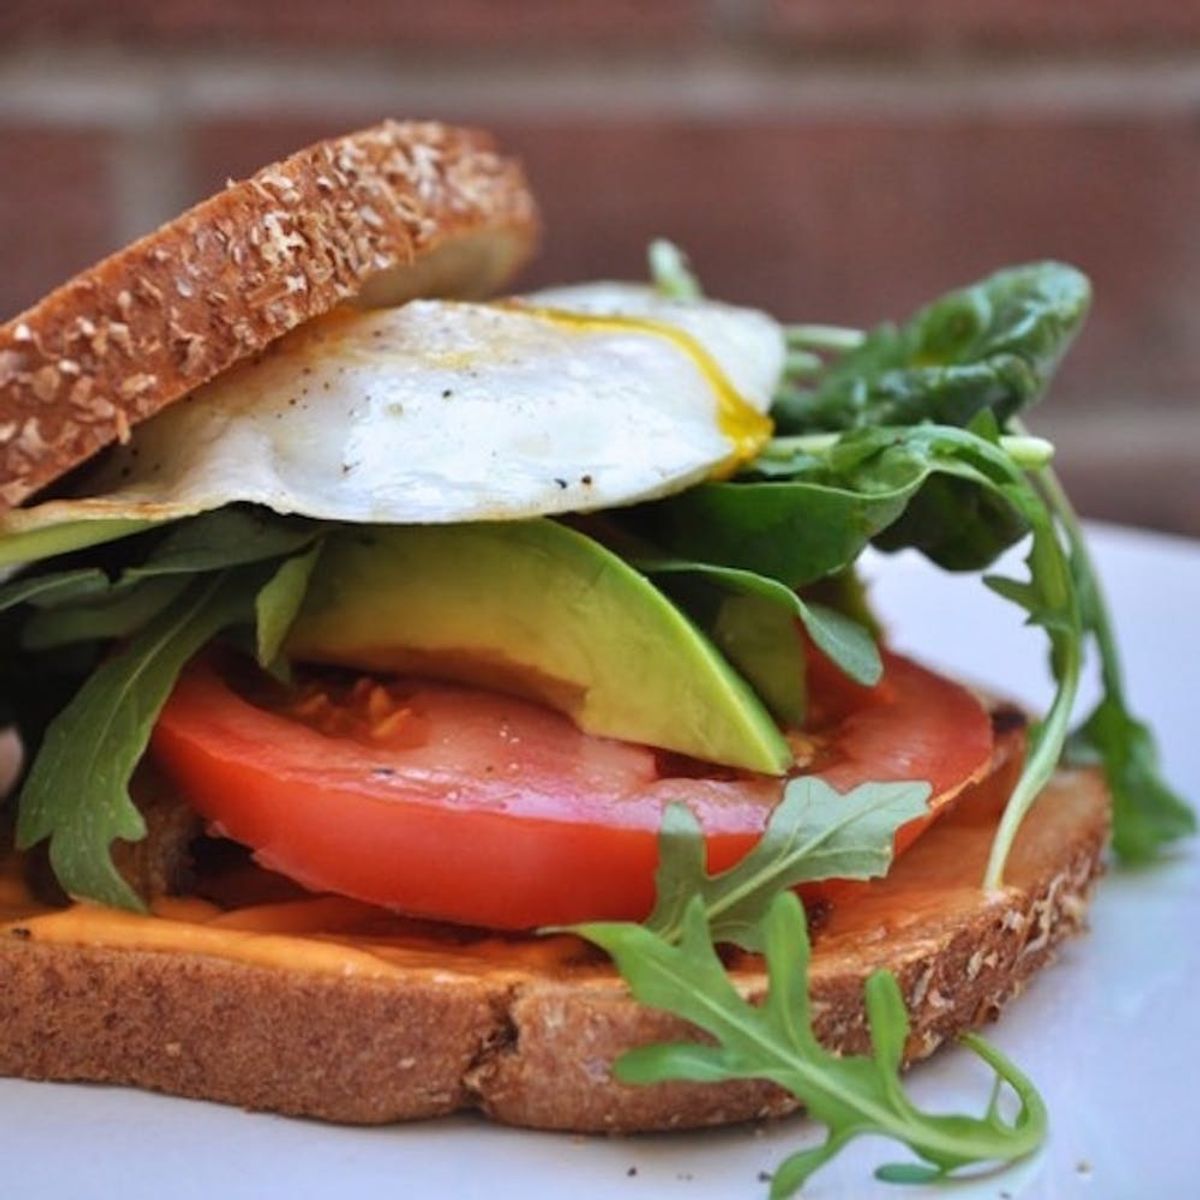 13 Egg + Avocado Recipes That Prove They’re the Greatest Power Couple Ever